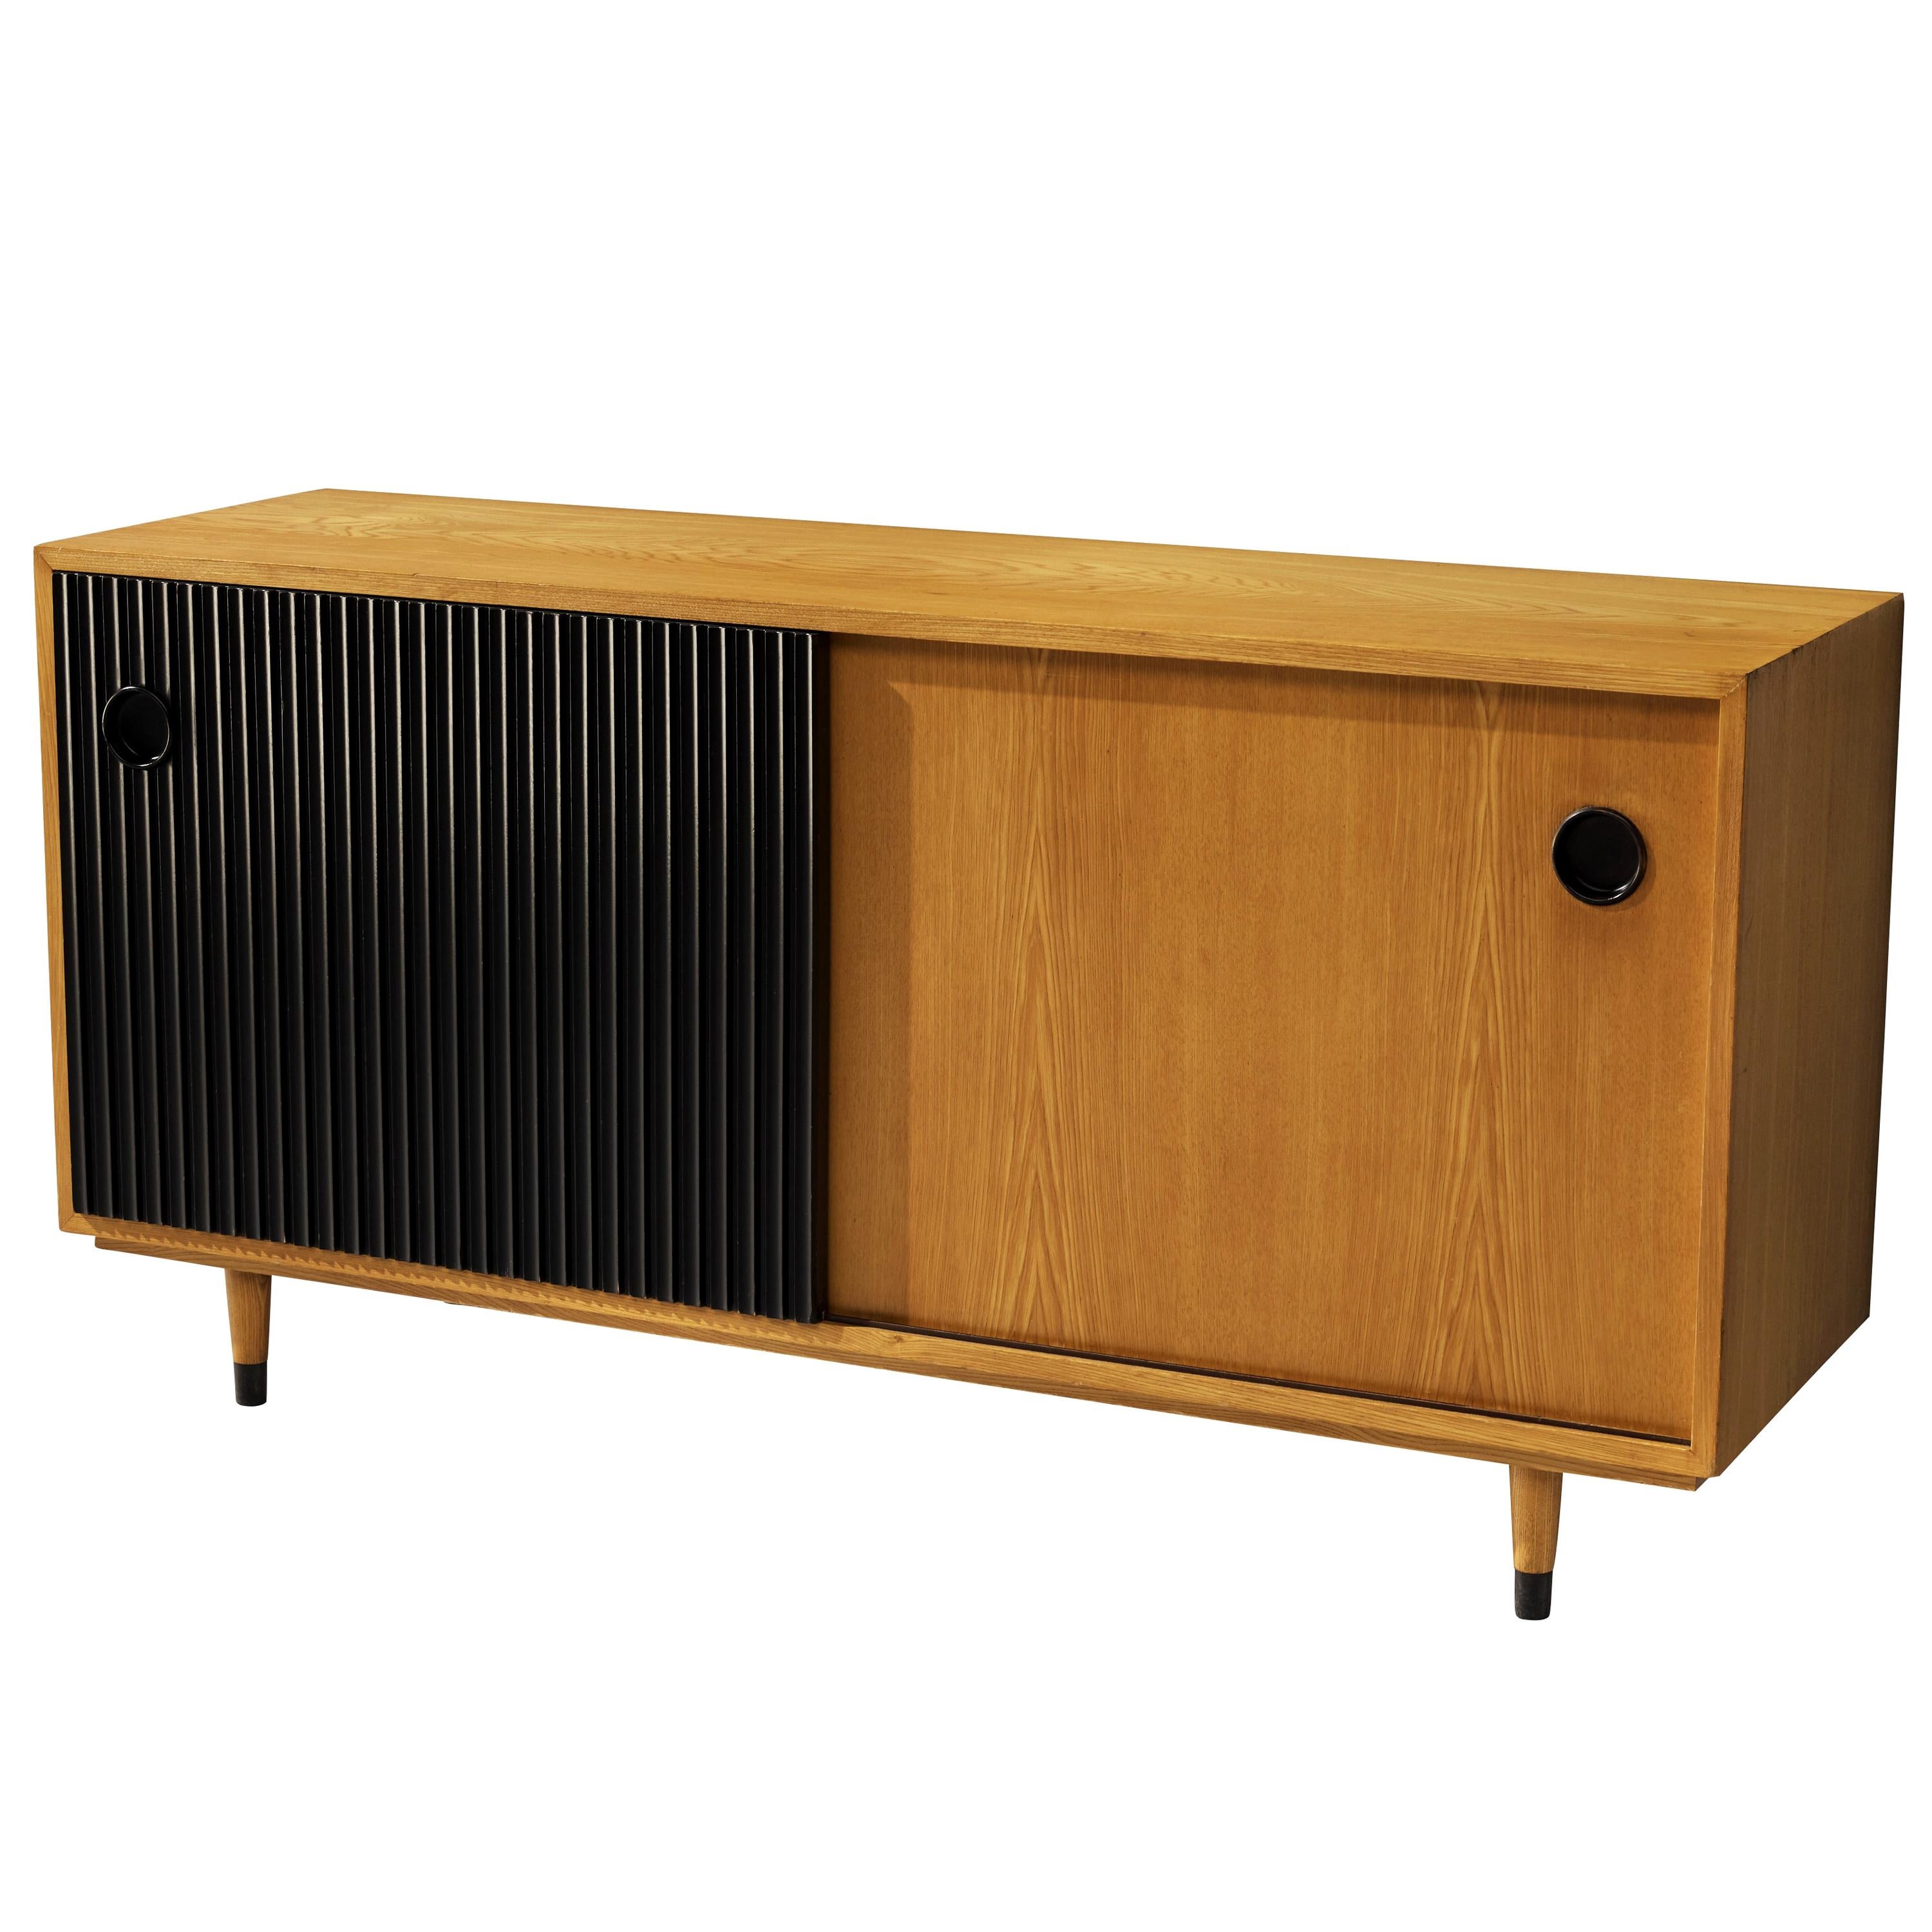 Erich Stratmann Bicolored Sideboard in Ash with Sliding Doors